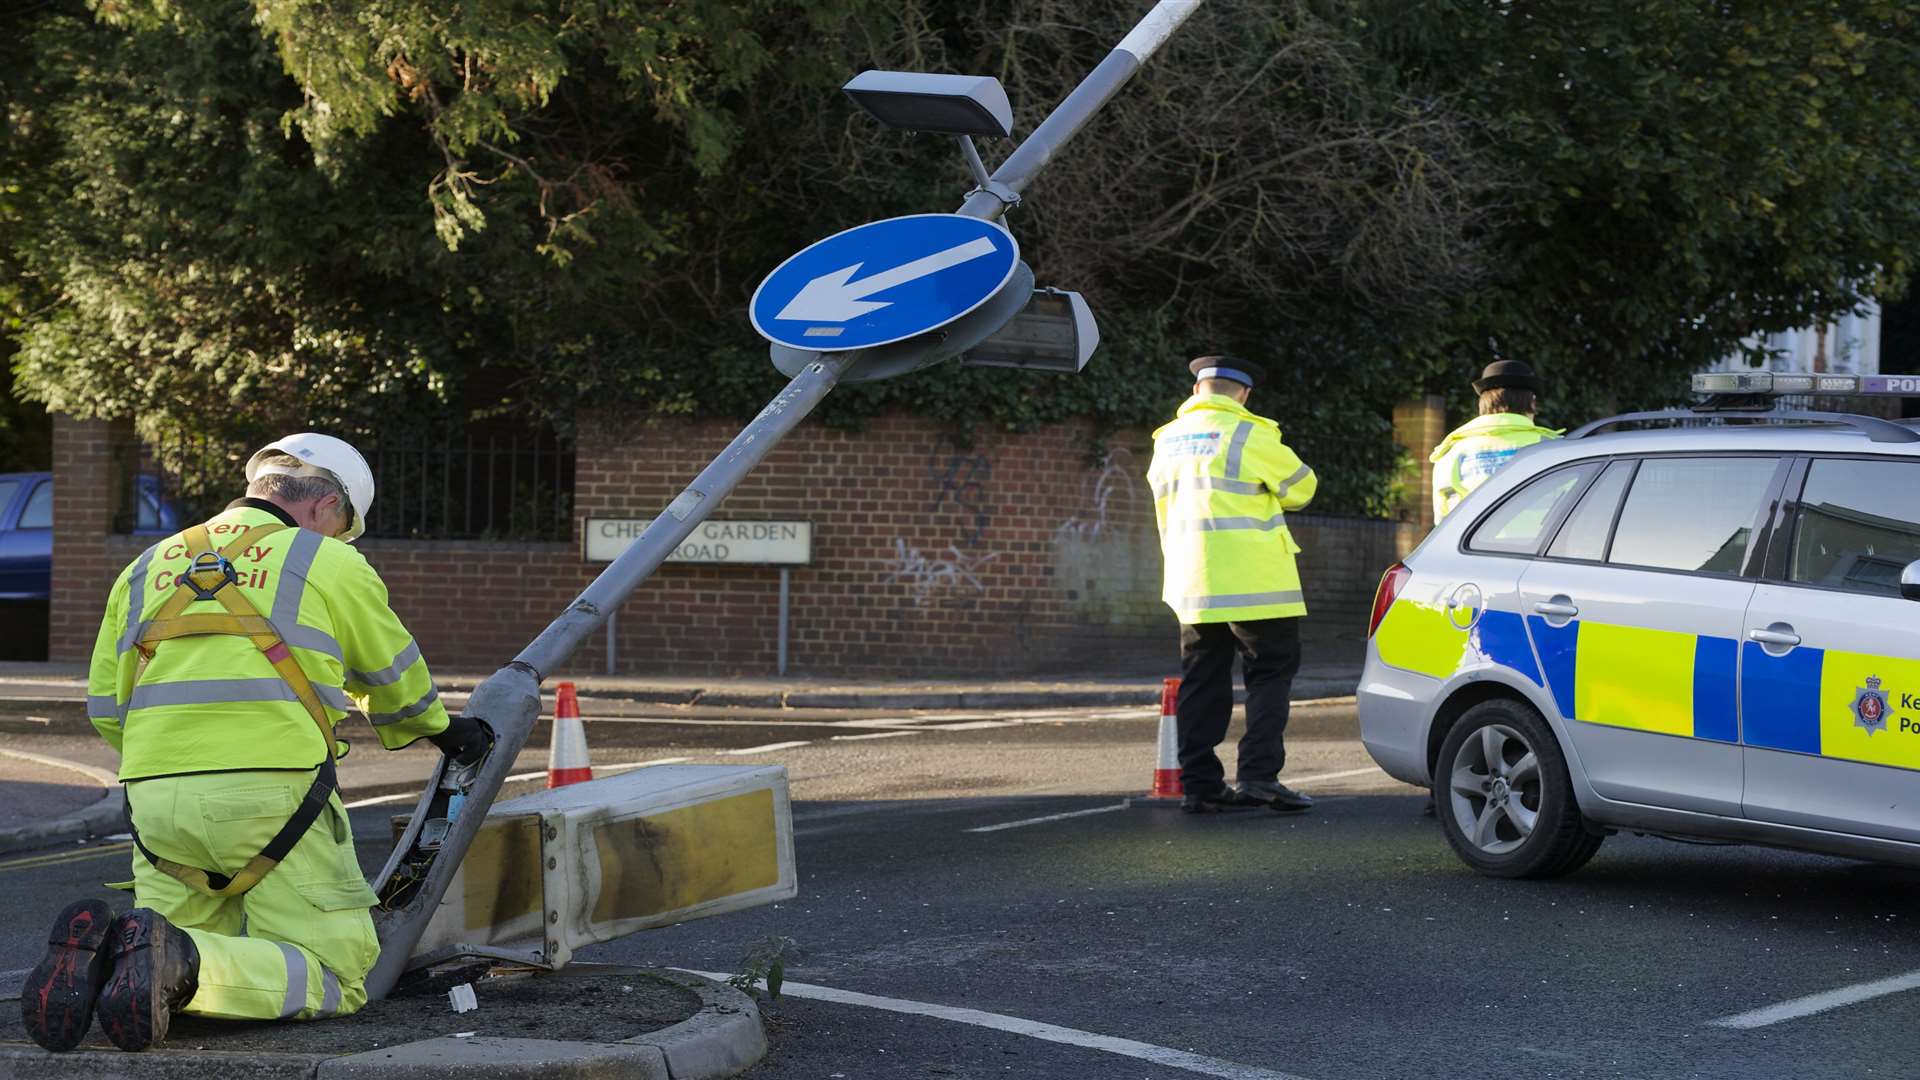 A workman from KCC works to disconnect a lamp standard damaged in the crash